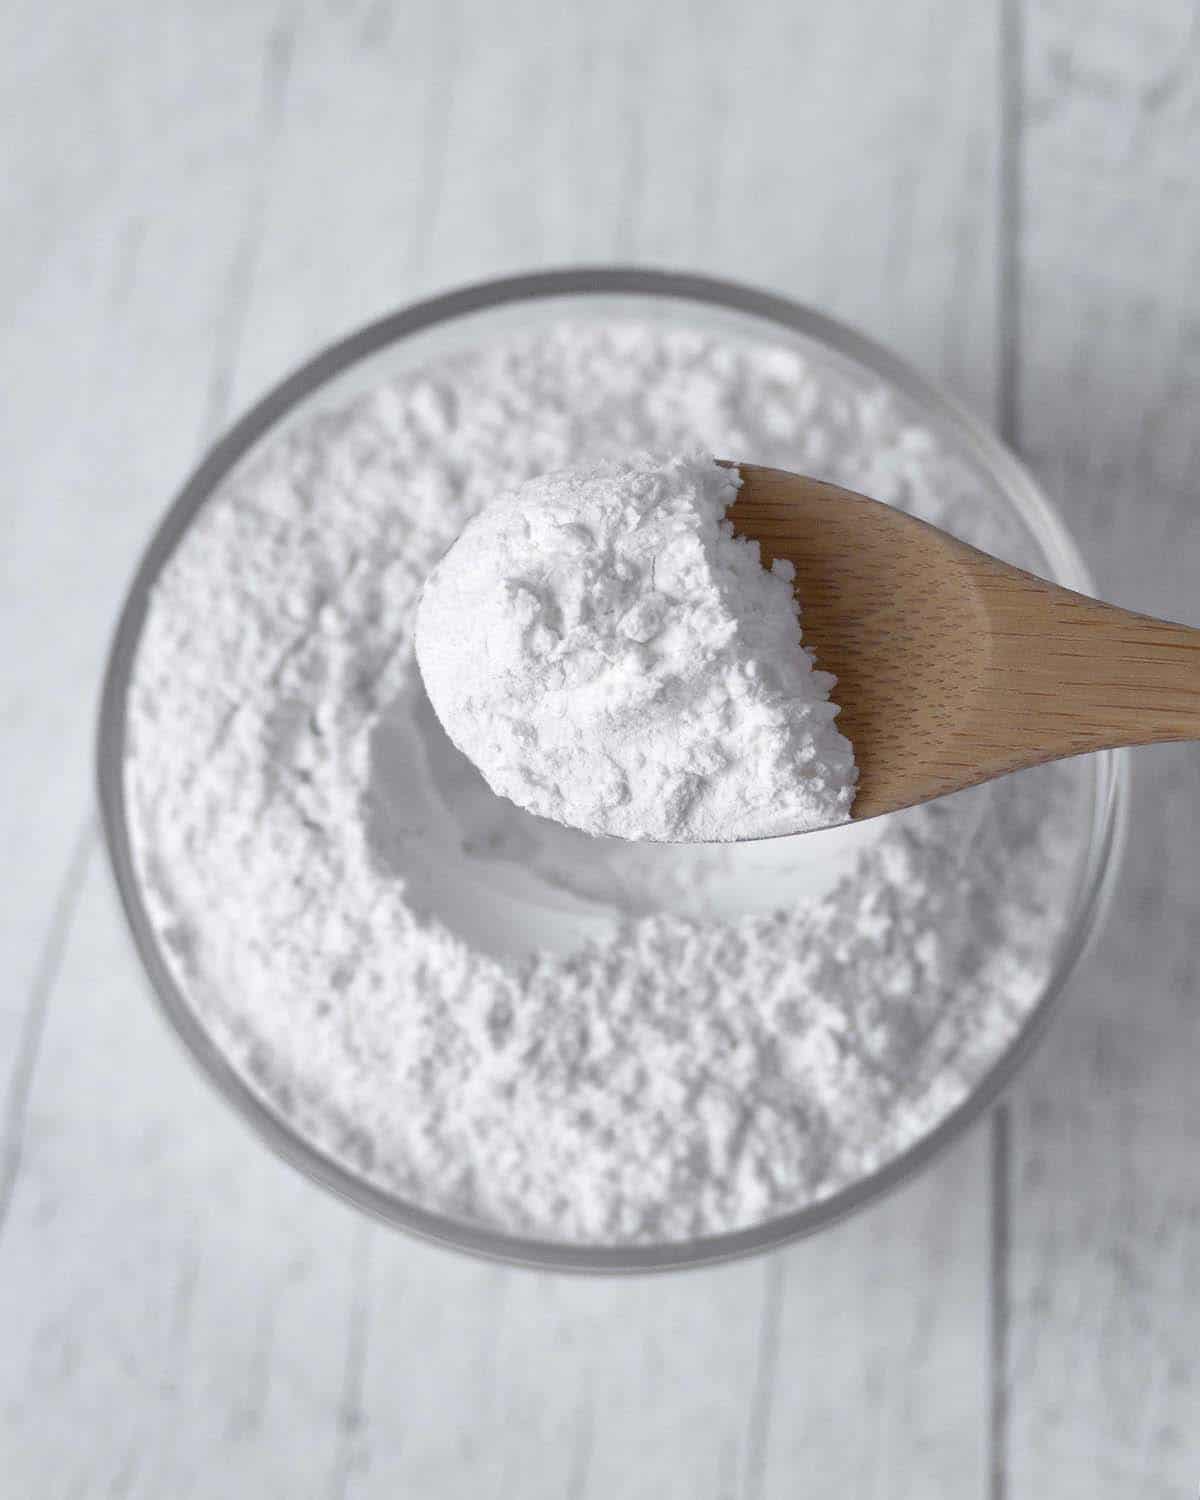 A wood spoon holding a spoon full of baking powder over a glass bowl filled with baking powder.